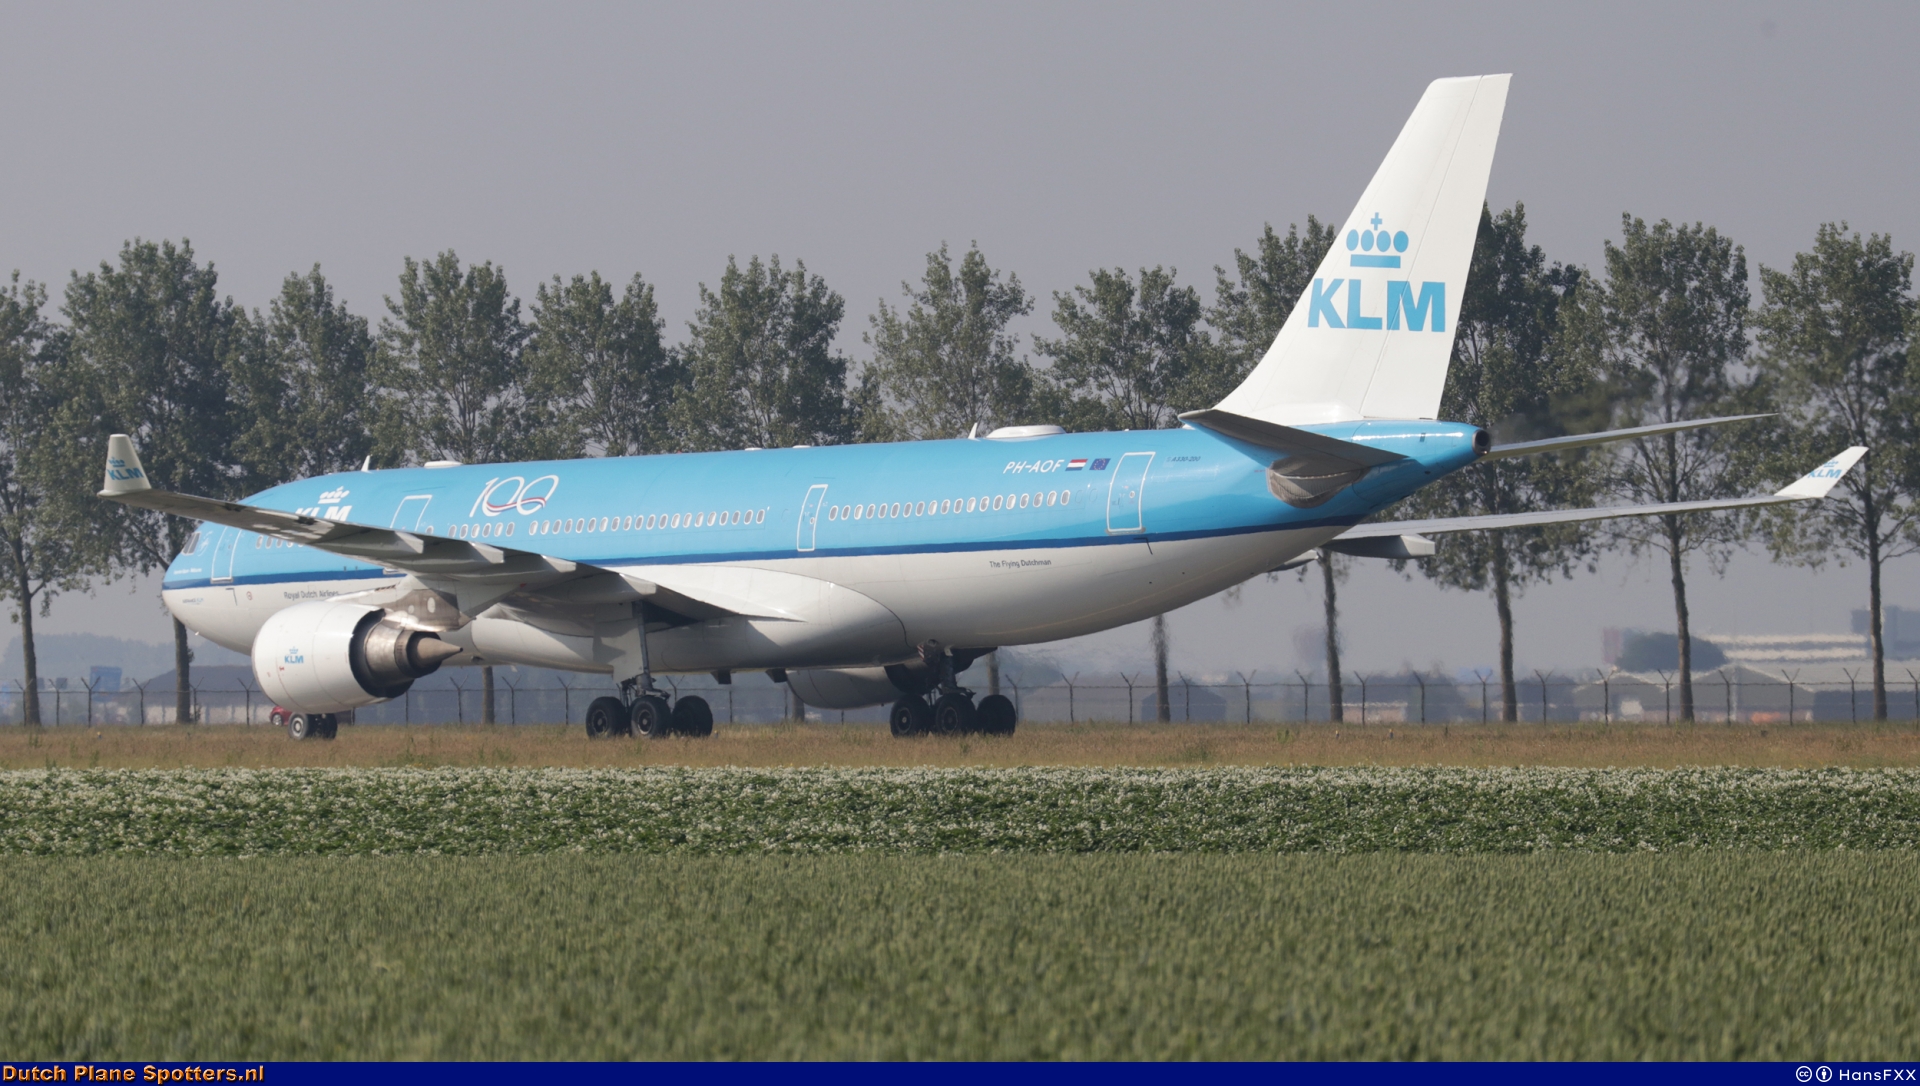 PH-AOF Airbus A330-200 KLM Royal Dutch Airlines by HansFXX